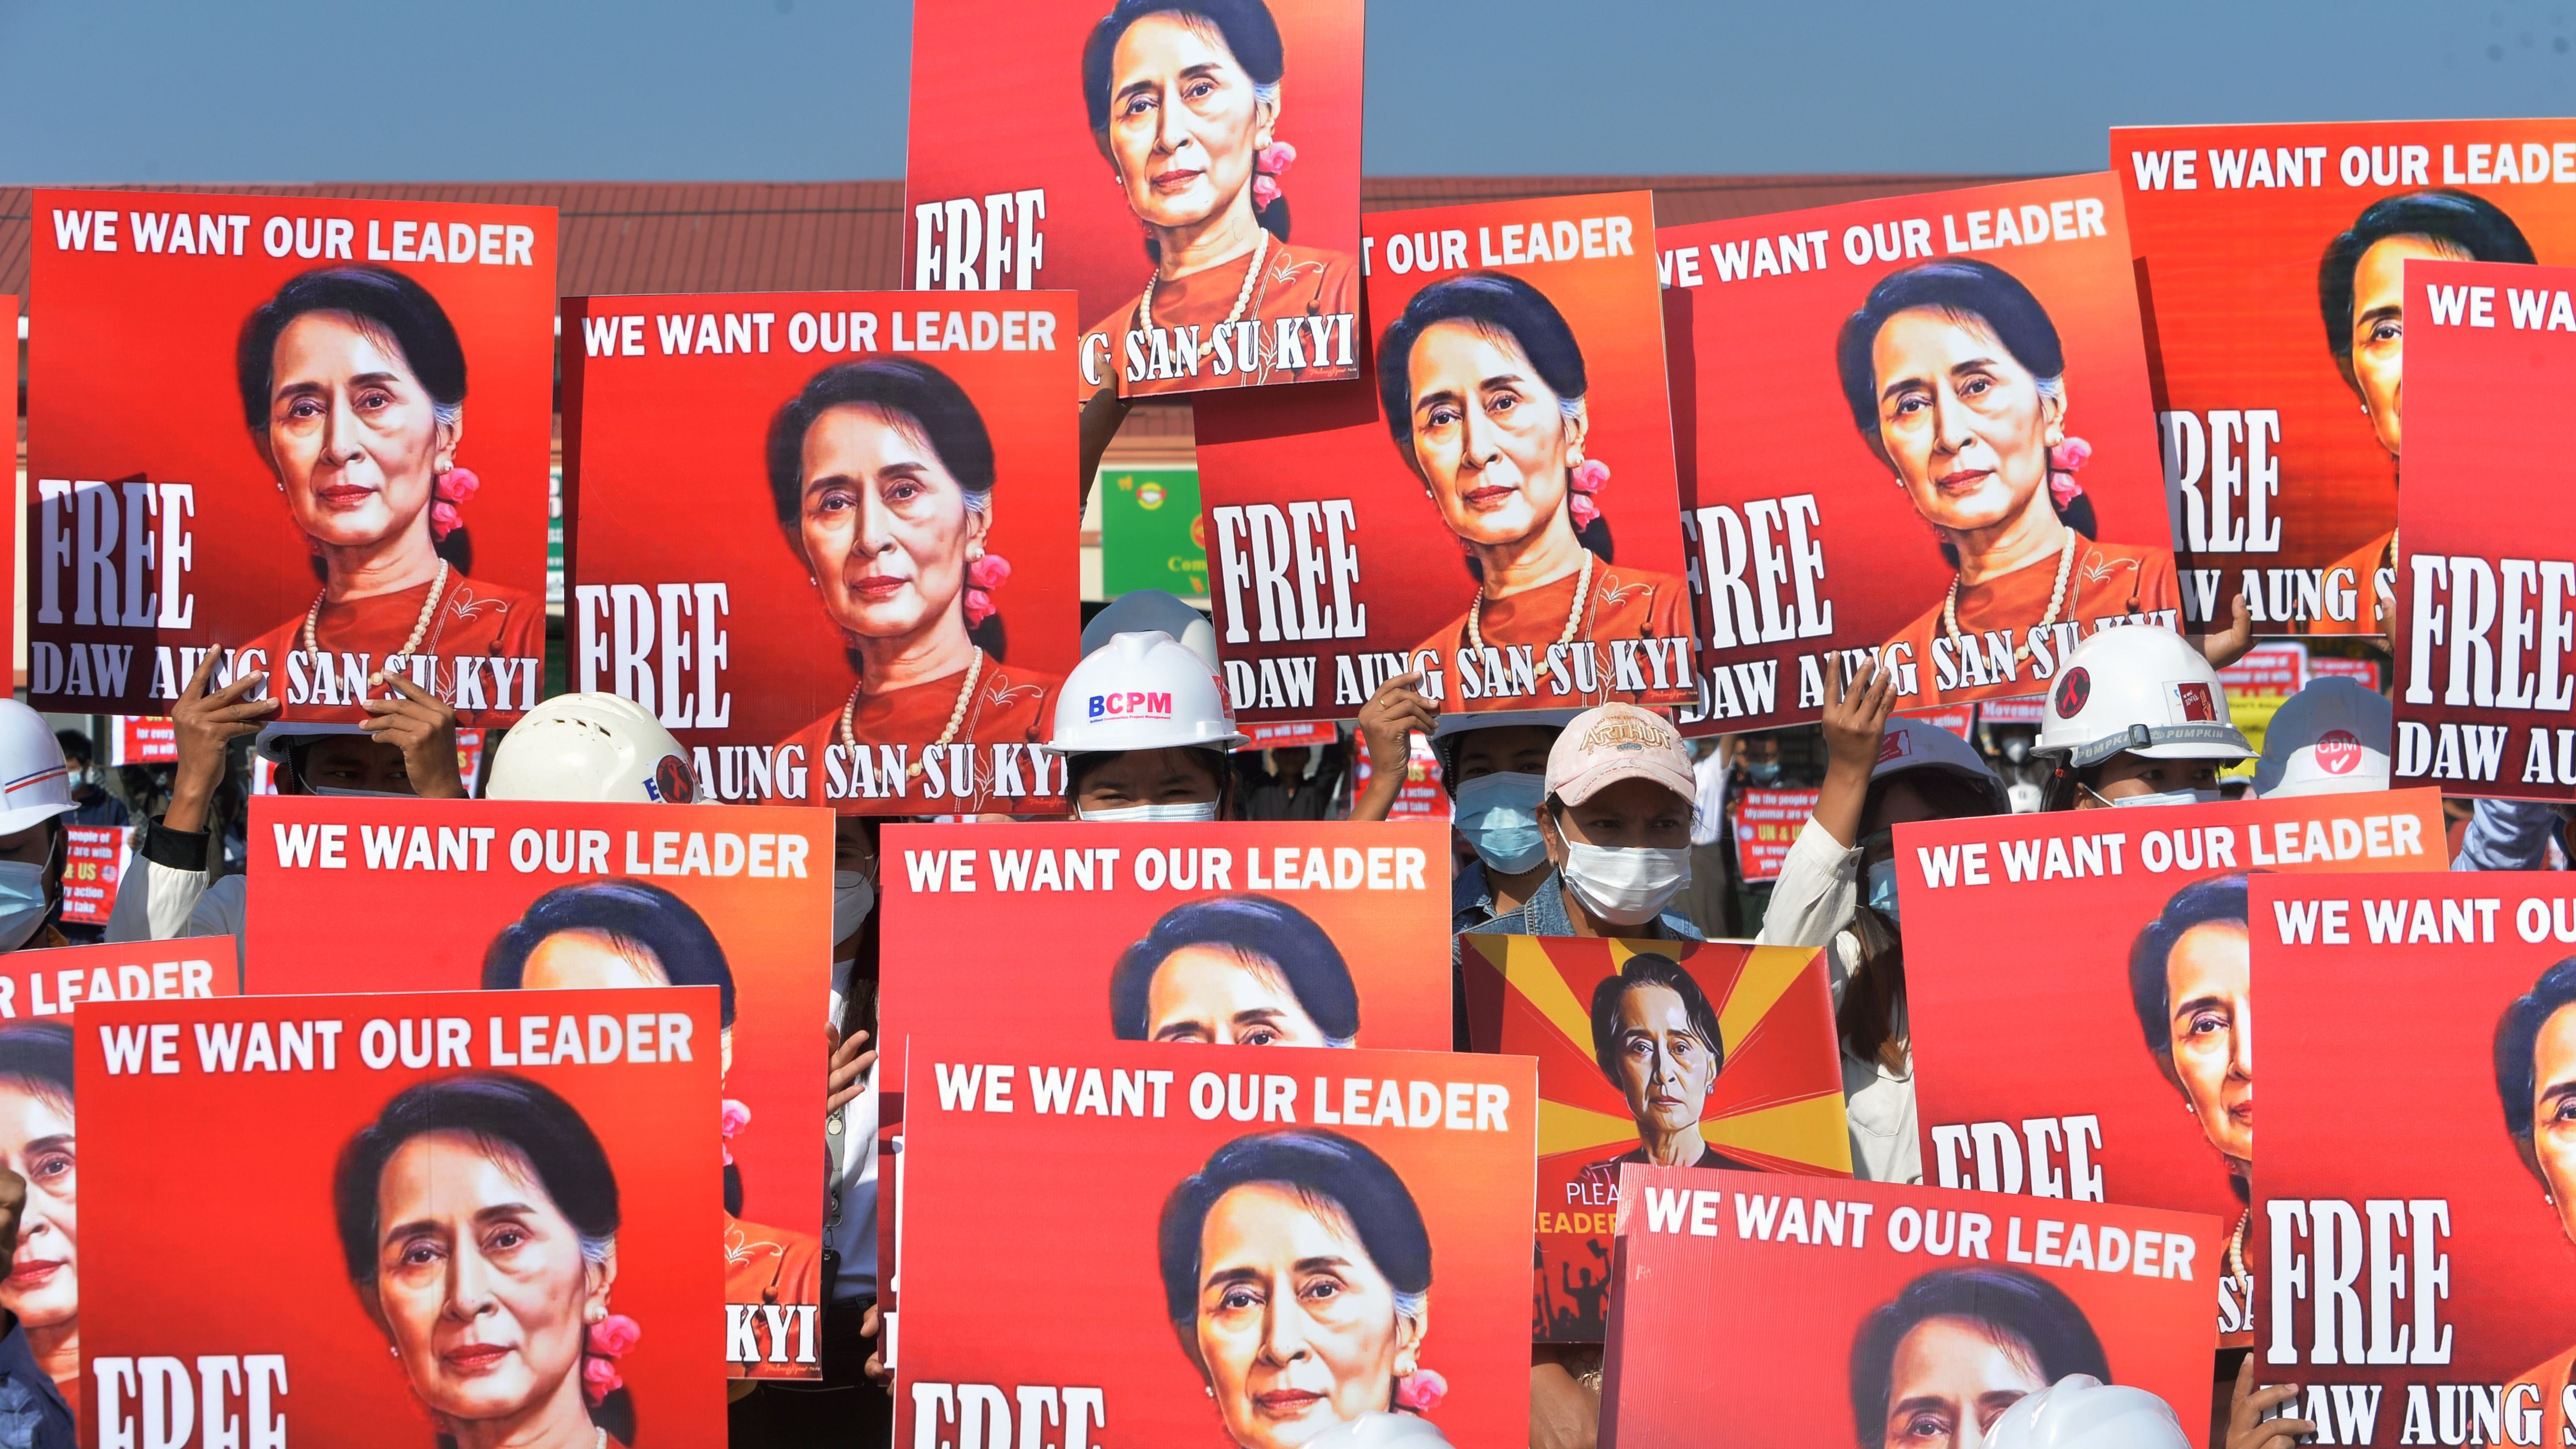 A group of protesting engineers hold up signs calling for the release of detained Myanmar civilian leader Aung San Suu Kyi during a rally against the country's military coup, Naypyidaw, Myanmar, Feb. 15, 2021.